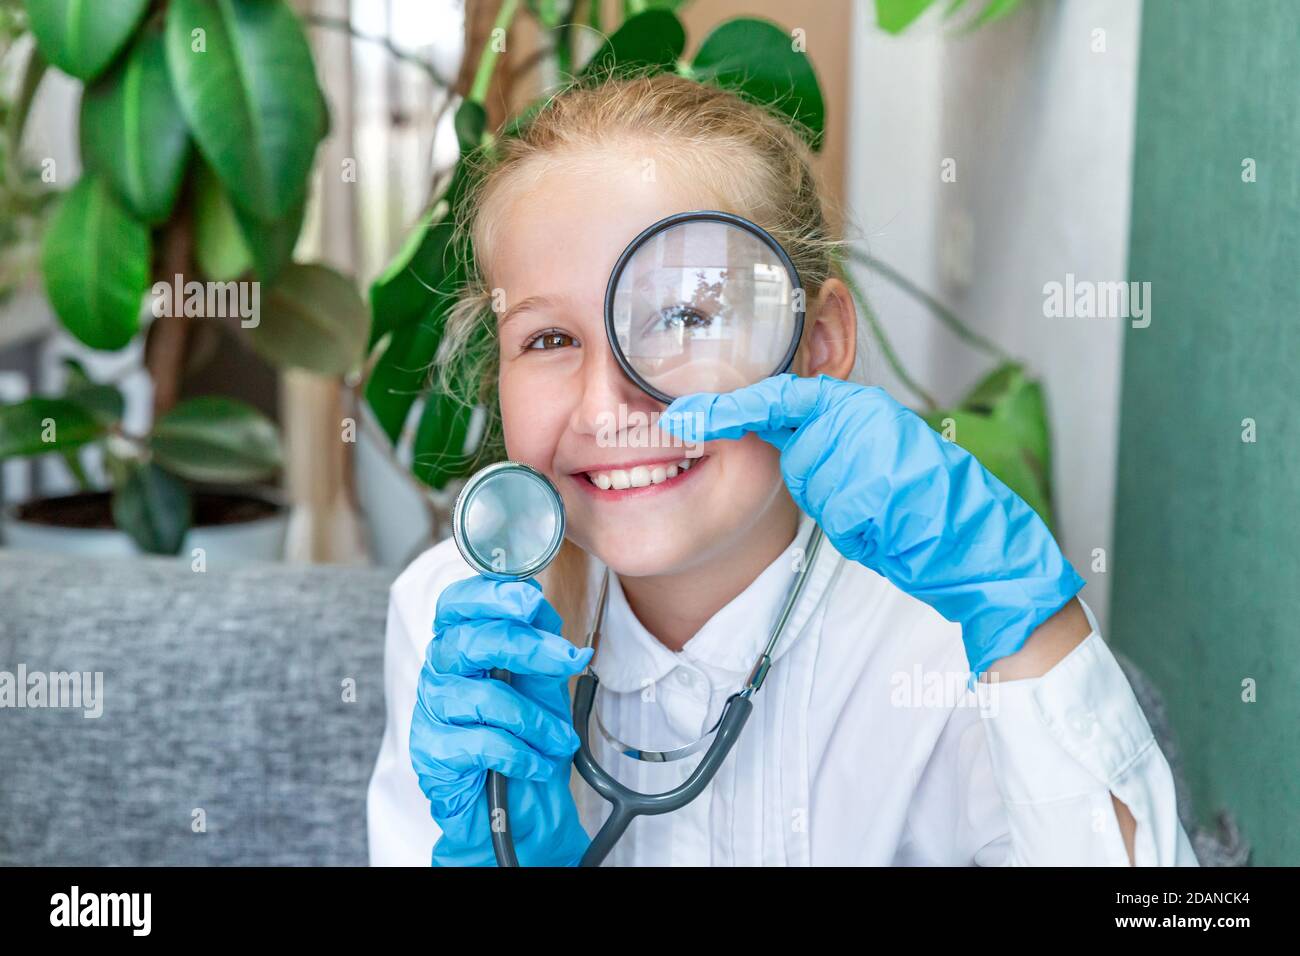 A Caucasian girl of 9-10 years old in a white coat, blue medical gloves holds a stethoscope in her hand, looks through a magnifying glass, smiles. Res Stock Photo